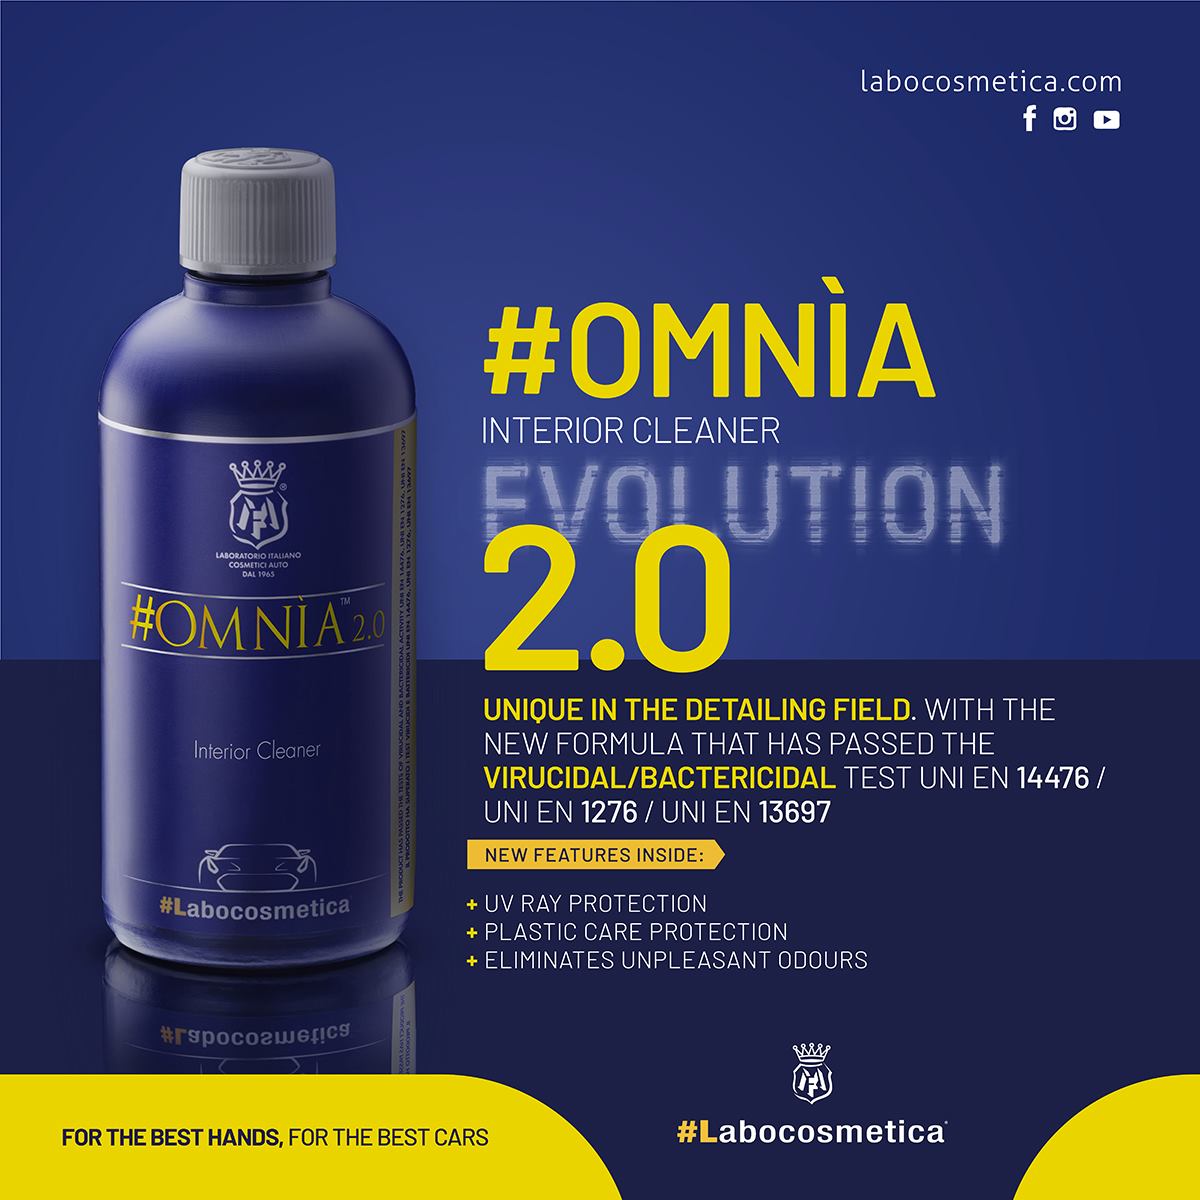 Labocosmetica Omnia interior cleaner bottle. Antiviral cleaner. Labcosmetica Cork Ireland.Labocosmetica Omnia interior cleaner bottle. Safe on interior and leather. Suitable for wet vac and Tornador.  Antiviral cleaner. Labcosmetica Cork Ireland.